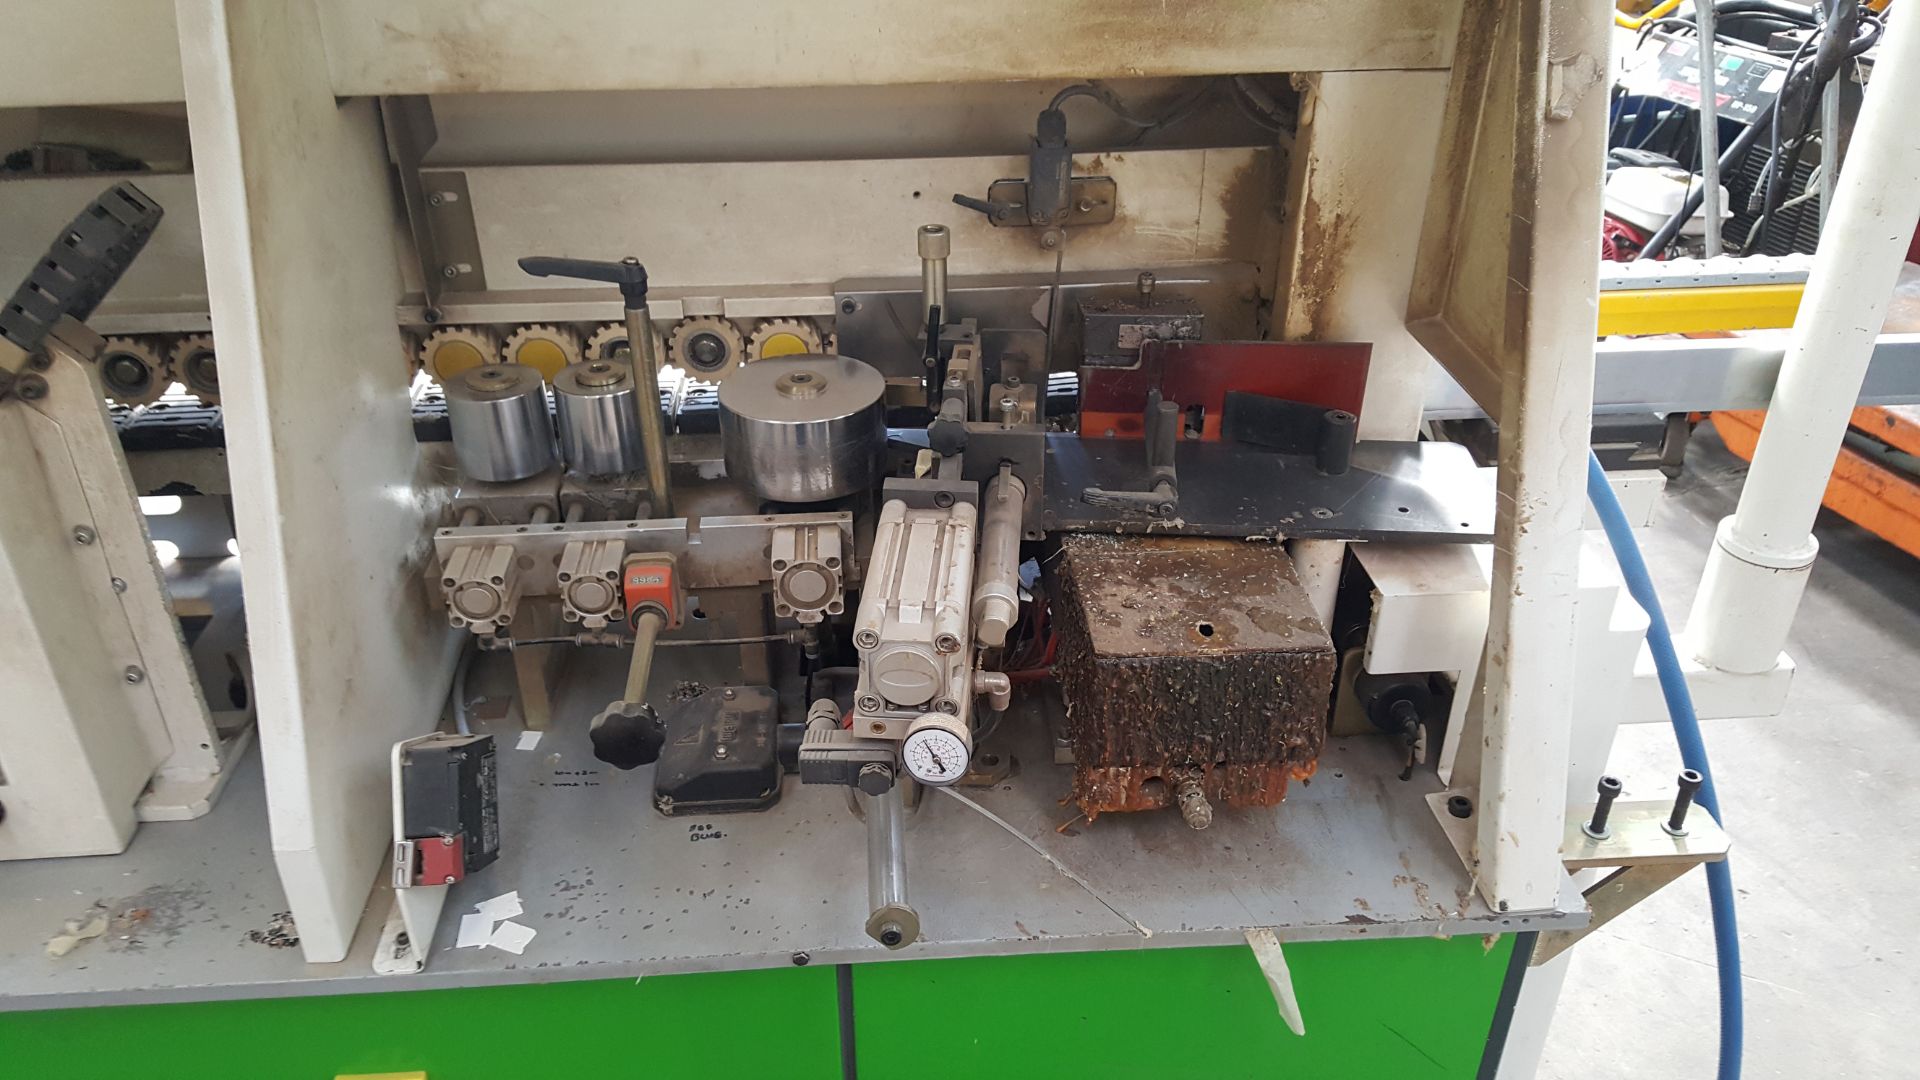 Lohmeyer KAM 775NP IQ Edgebander 3PH. Please note there is a £25 plus VAT Lift Out Fee on this lot - Image 3 of 8